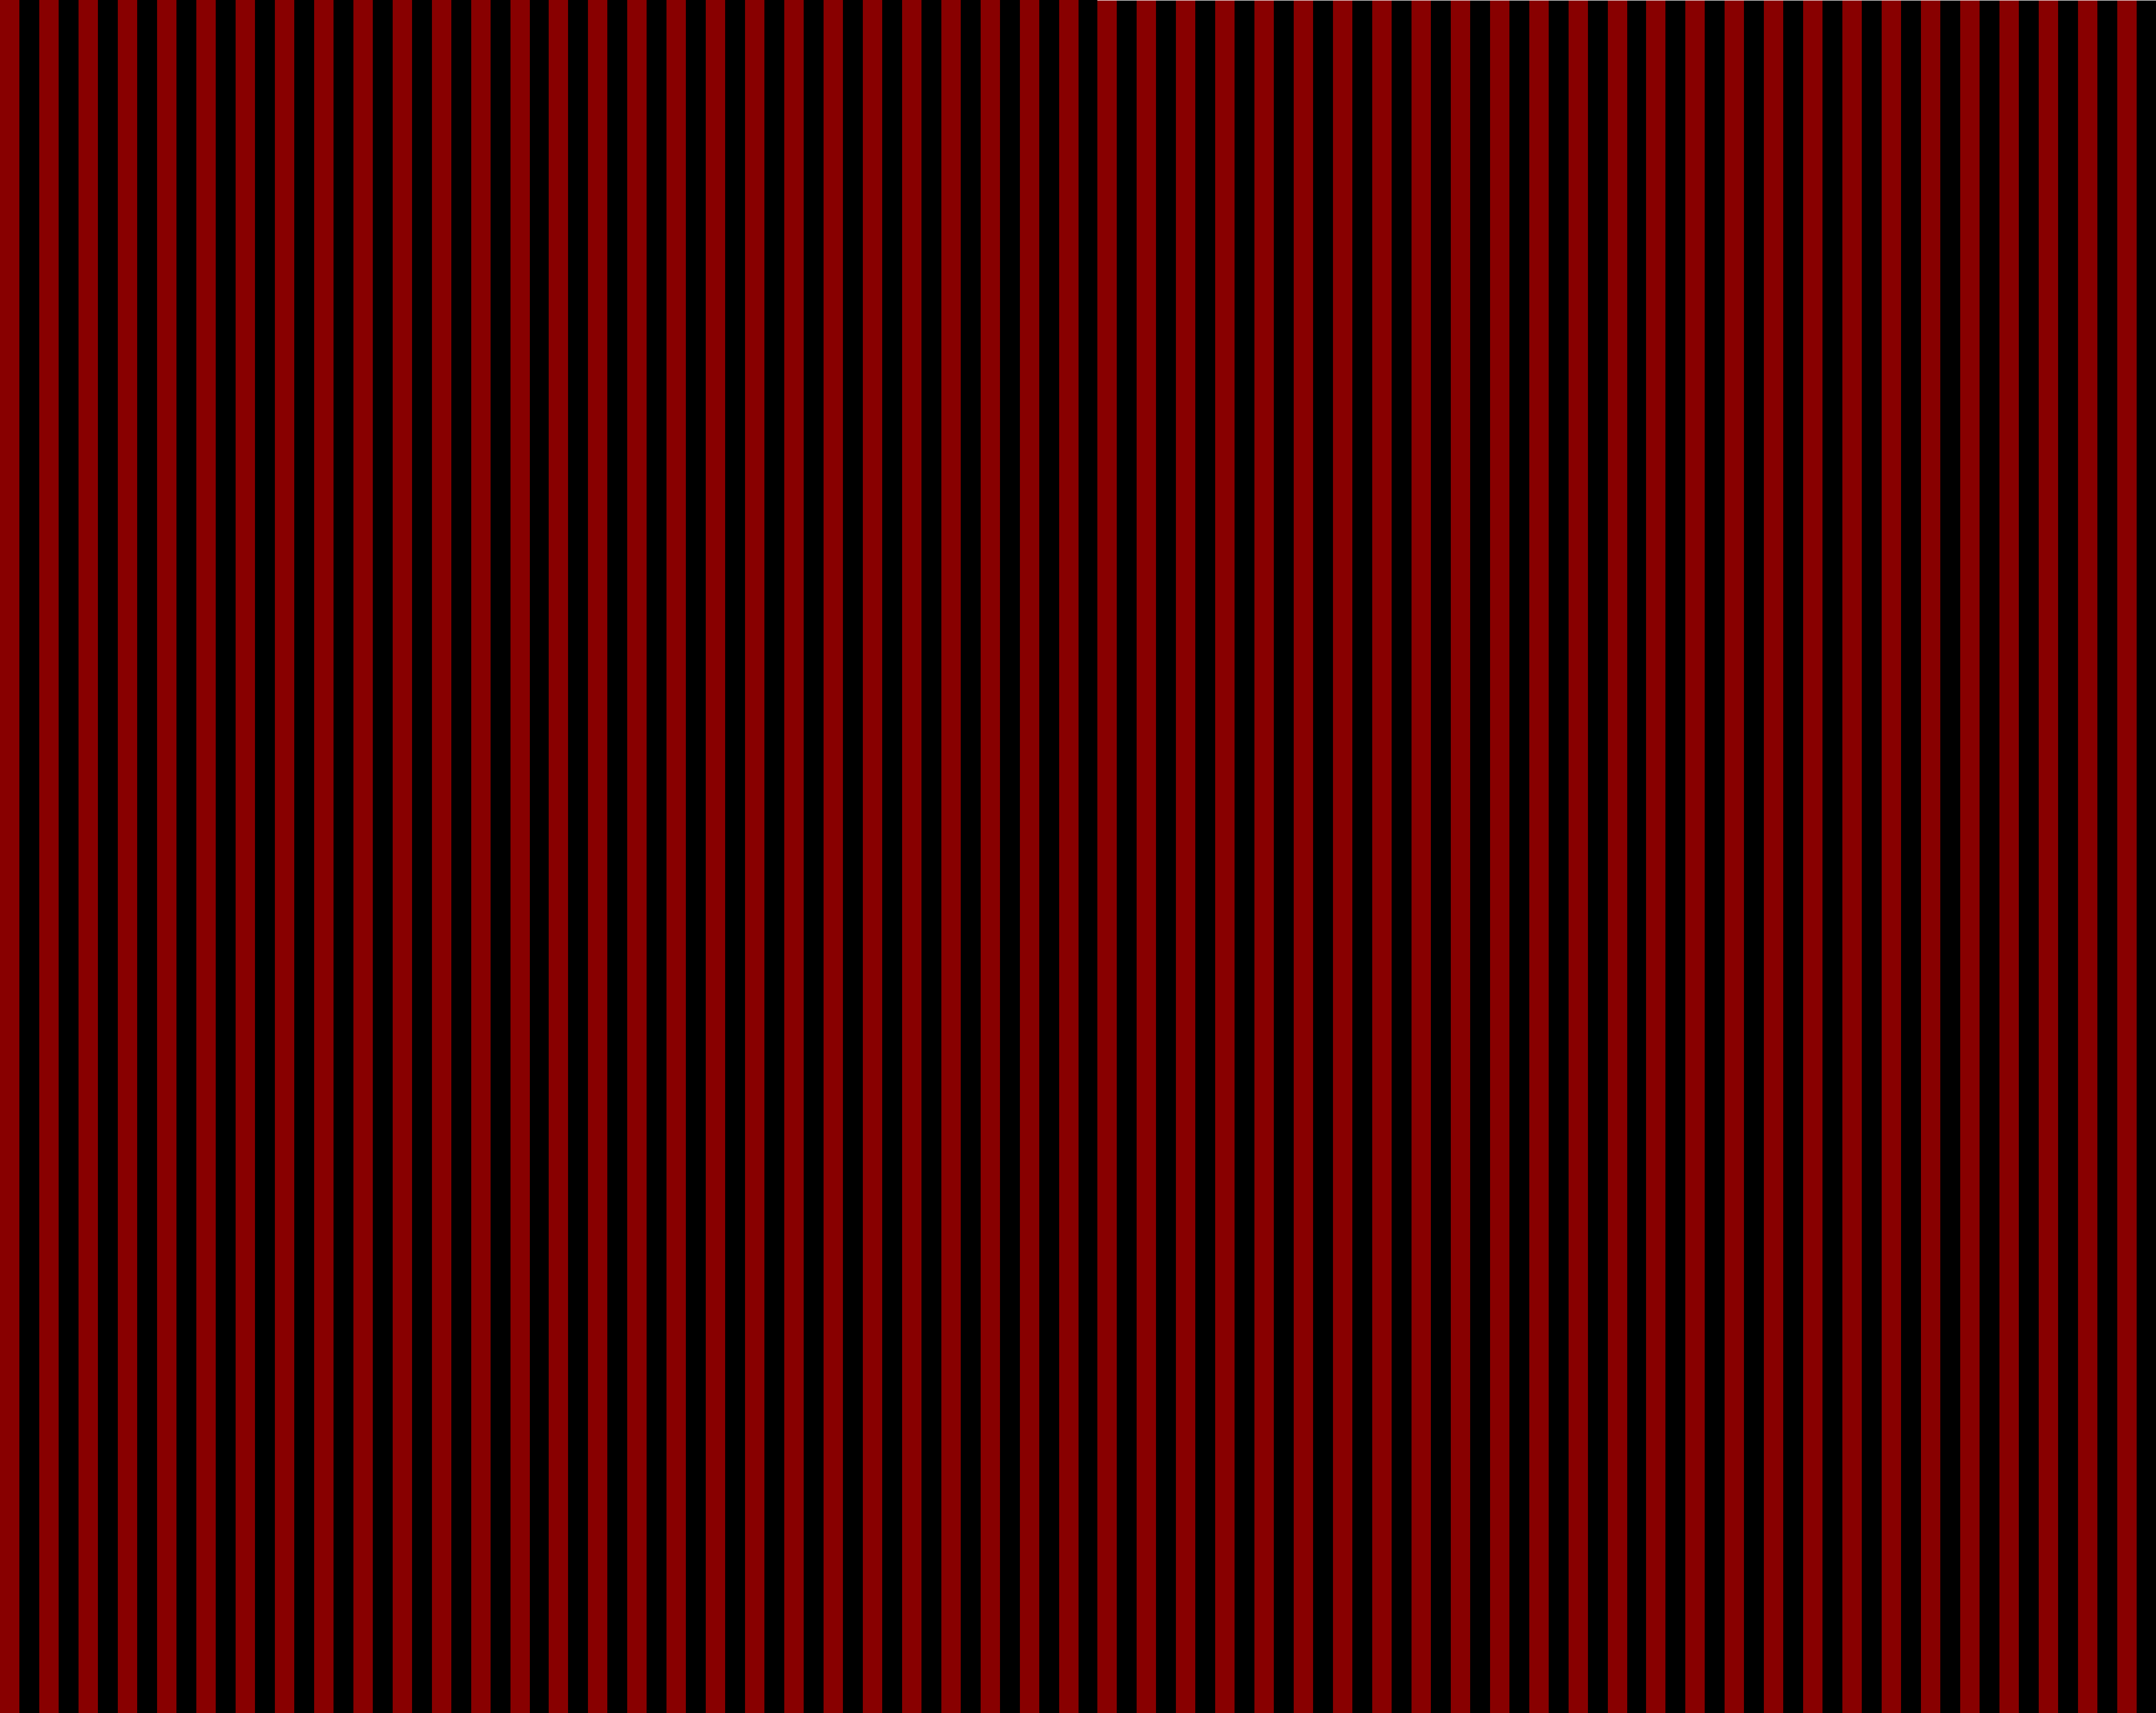 Black And Maroon Stripe Background By Ombrasova